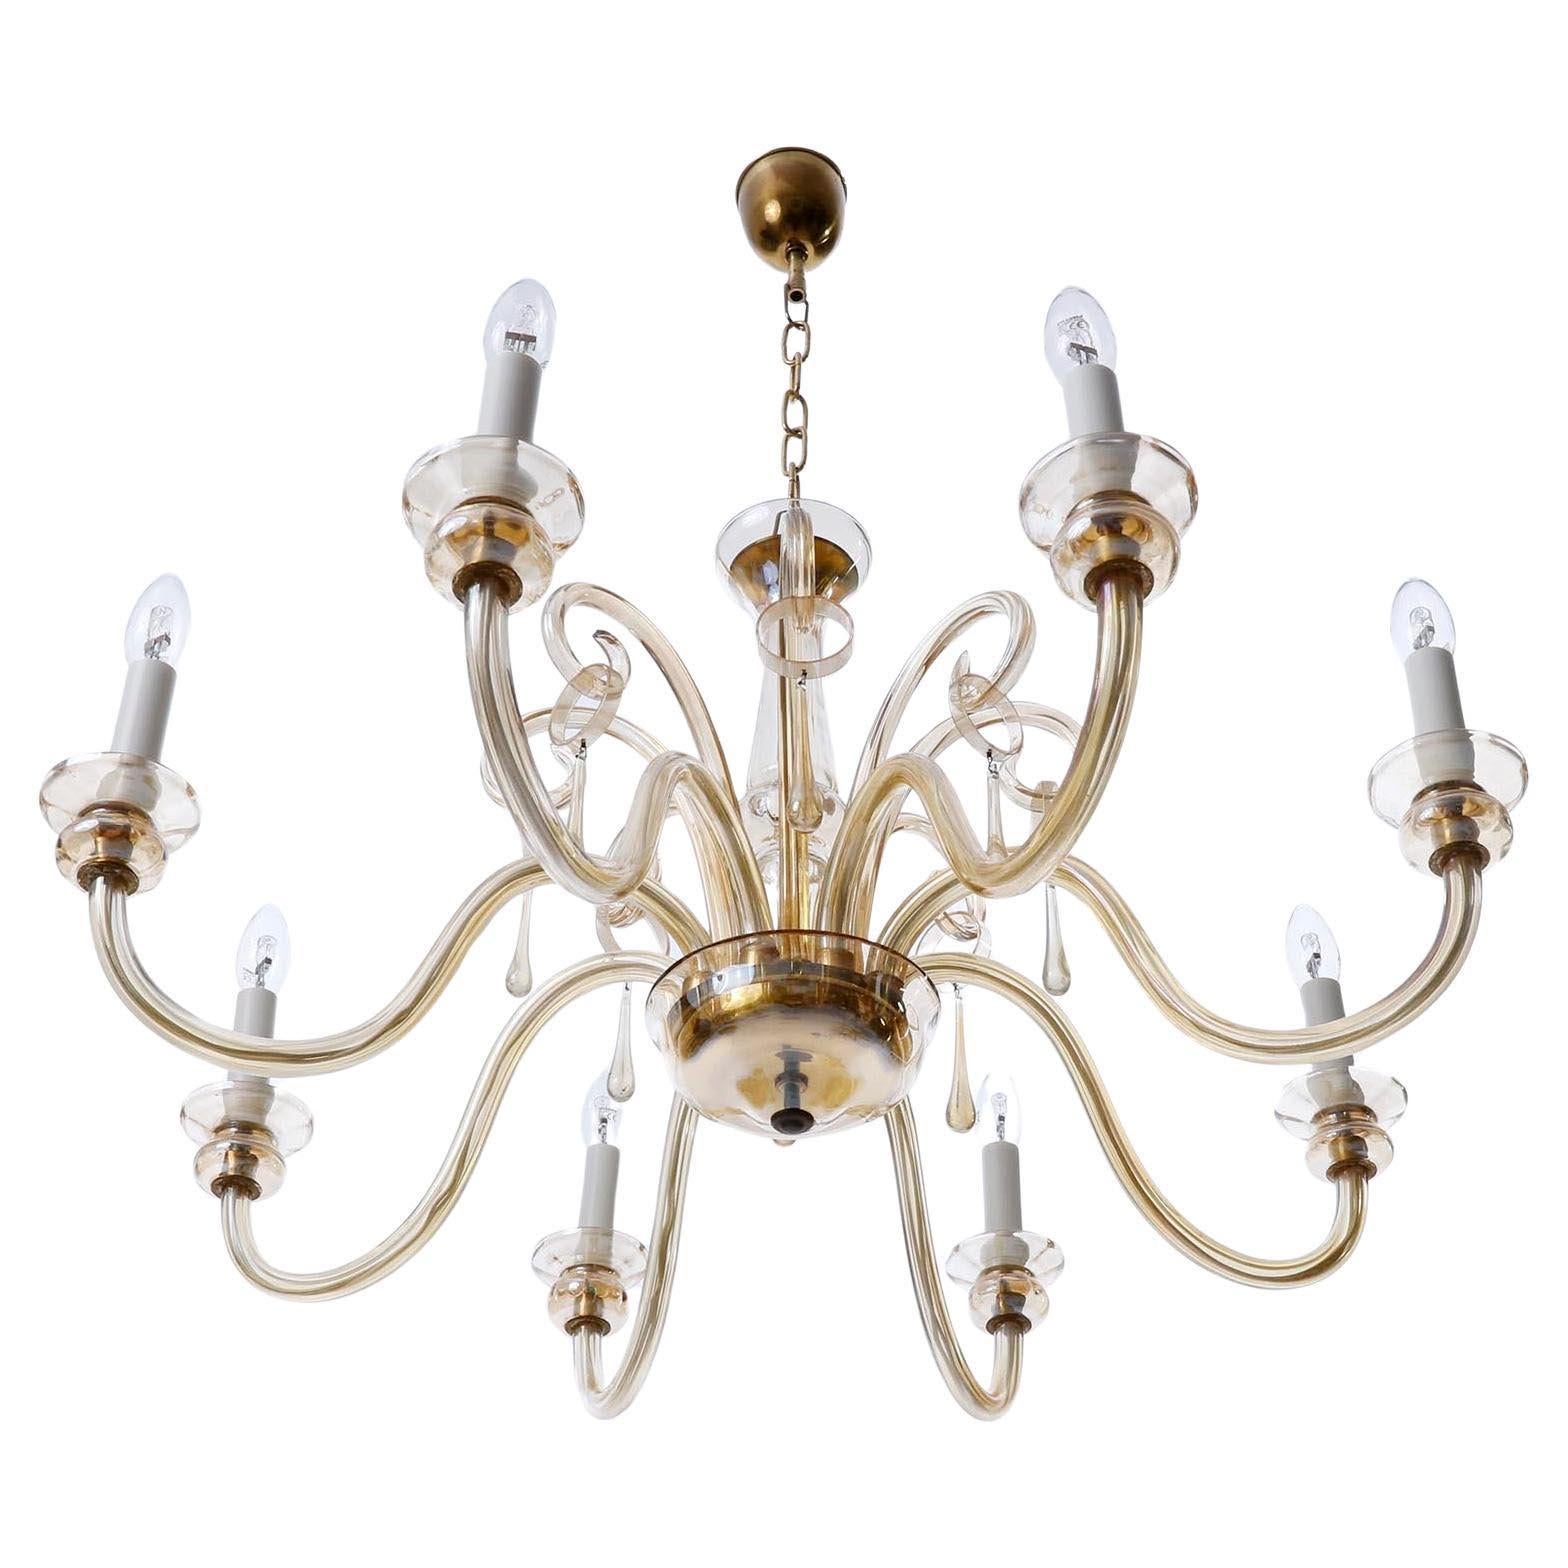 Brass Mid-Century Modern Amber Tone Murano Glass Chandelier, Eight Arms, 1960s For Sale